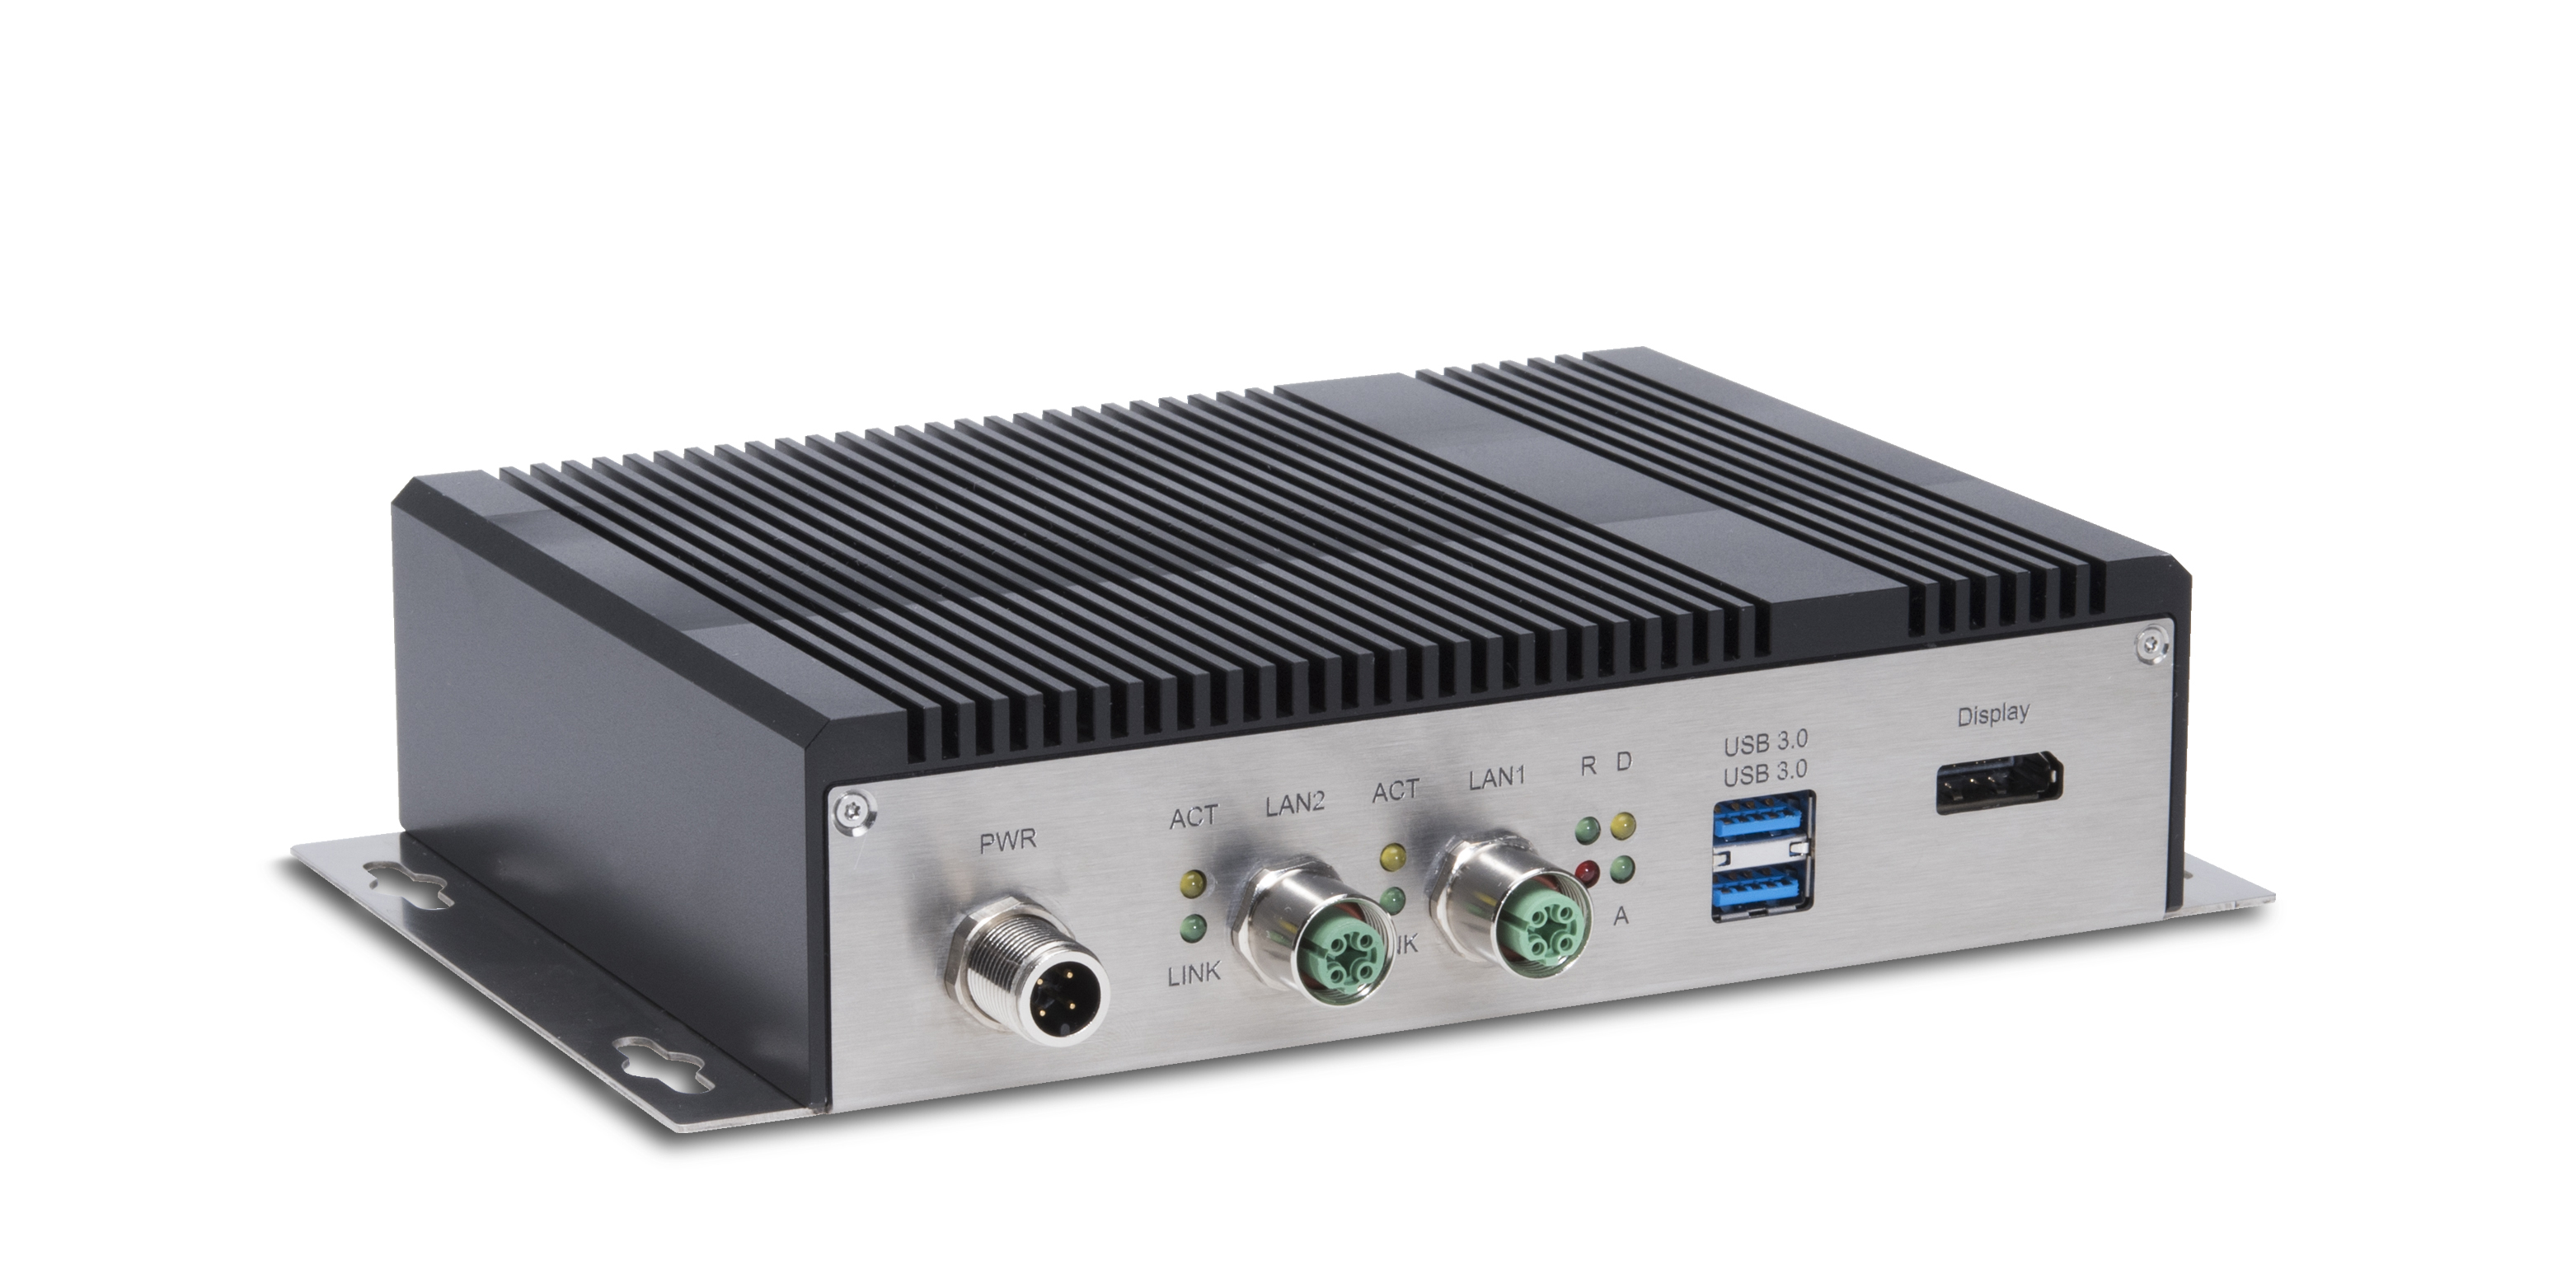 Rugged Industrial PC for commercial vehicles, railway and transportation applications.